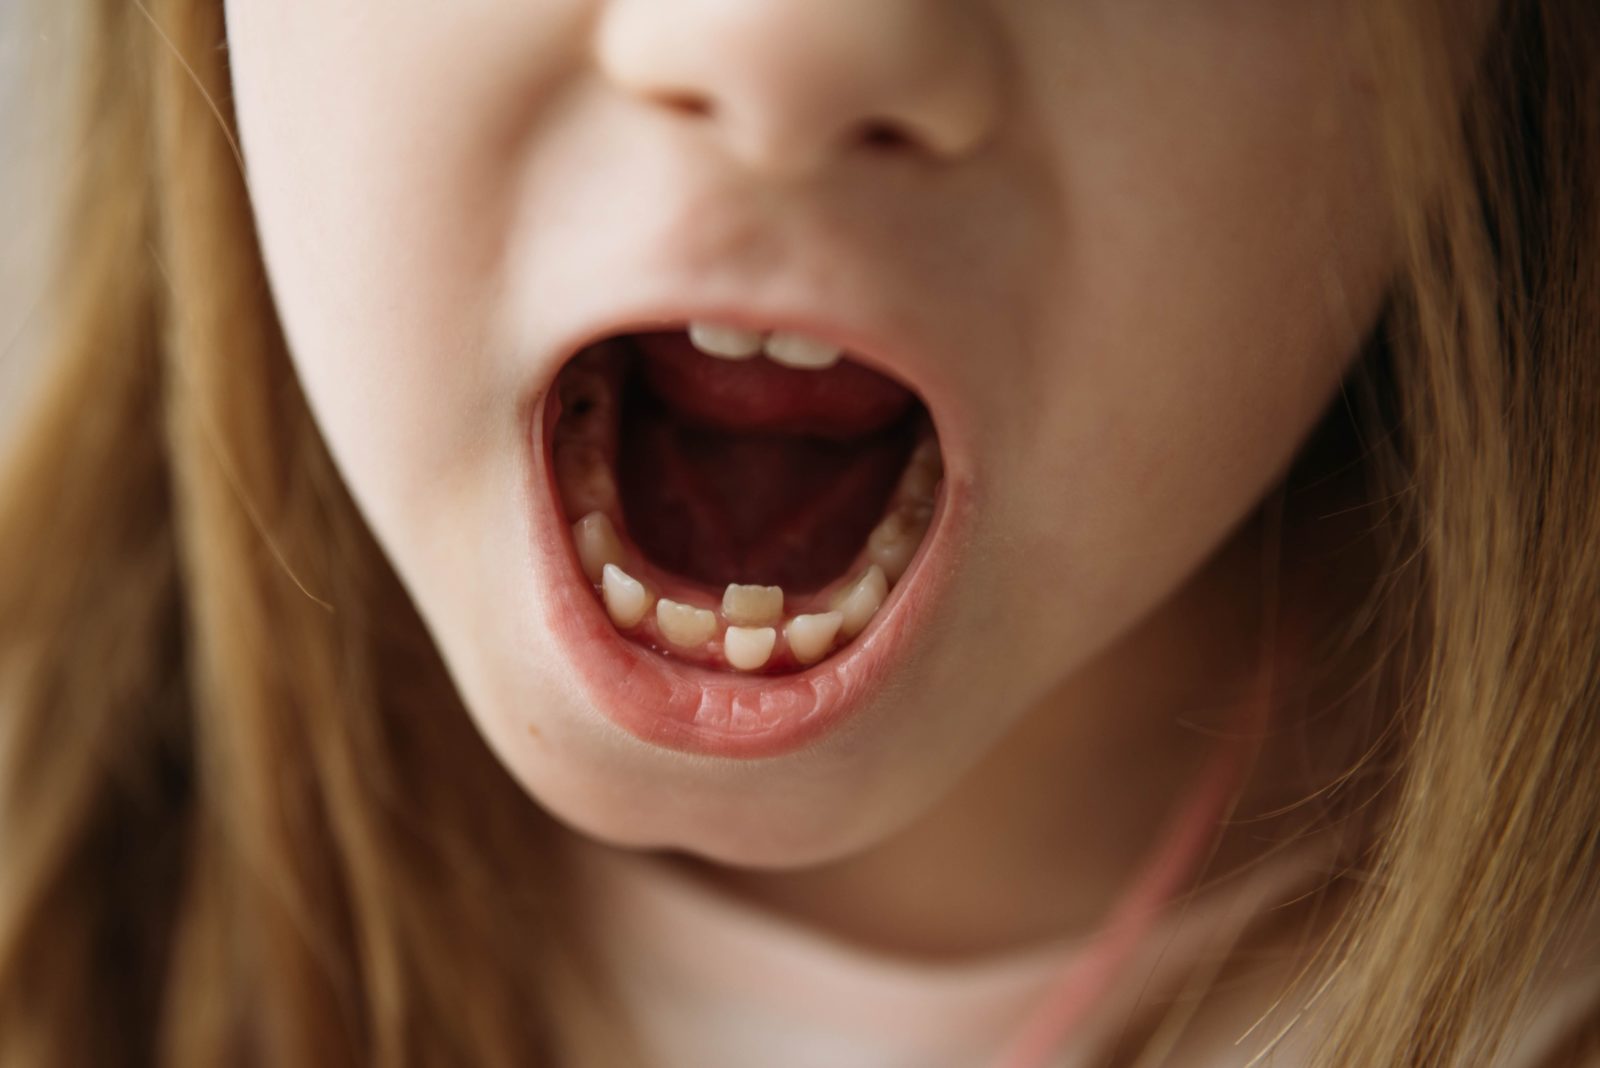 young girl with over-retained baby tooth